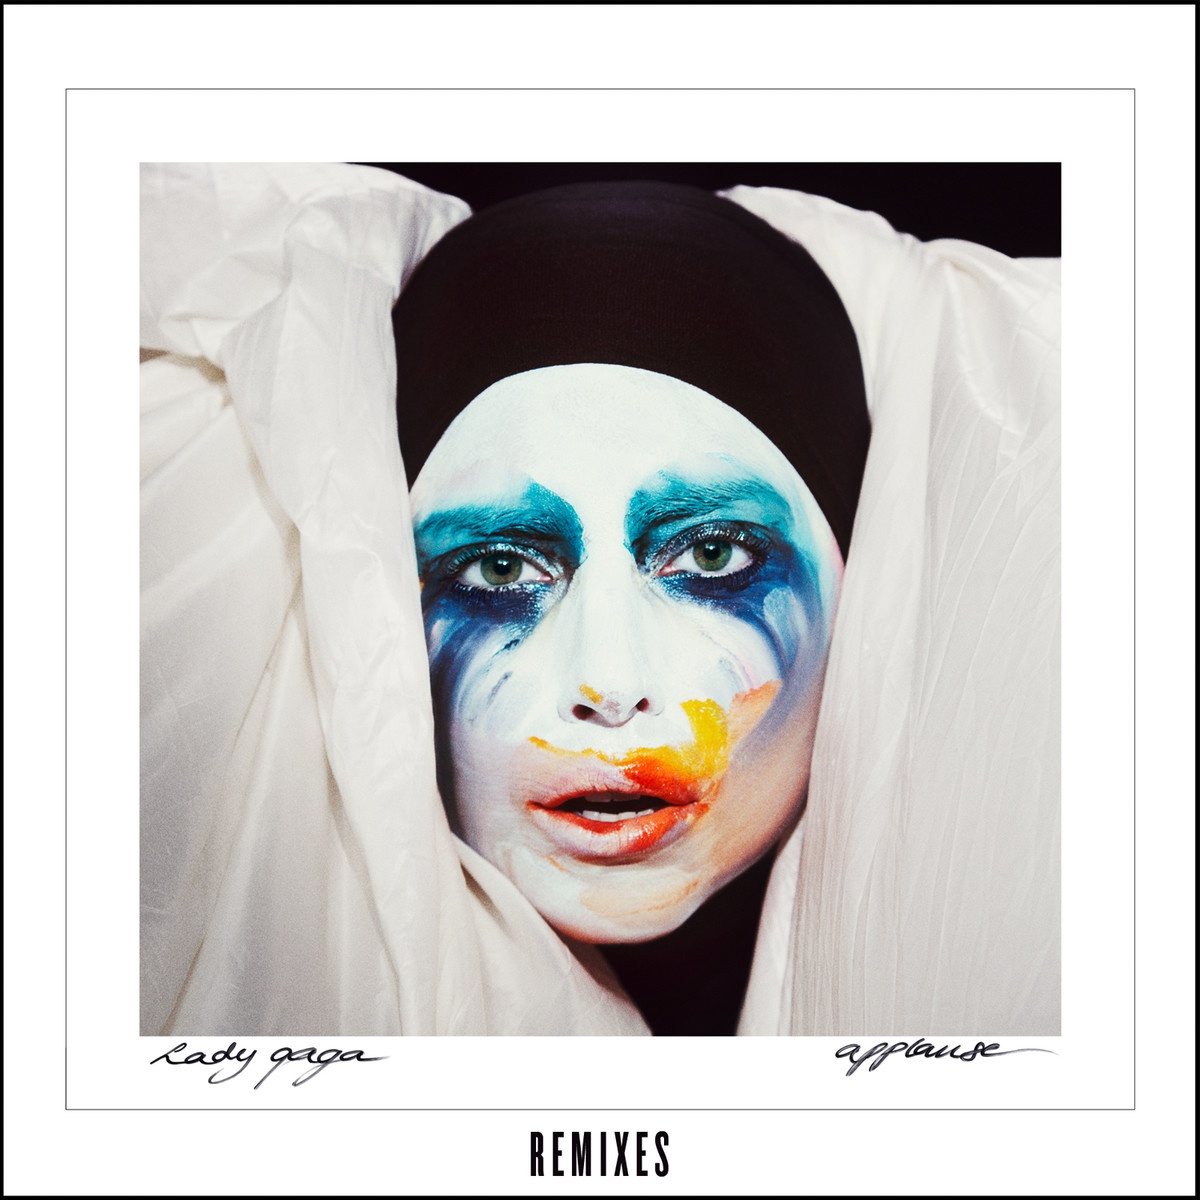 Applause (Empire of the Sun Remix)